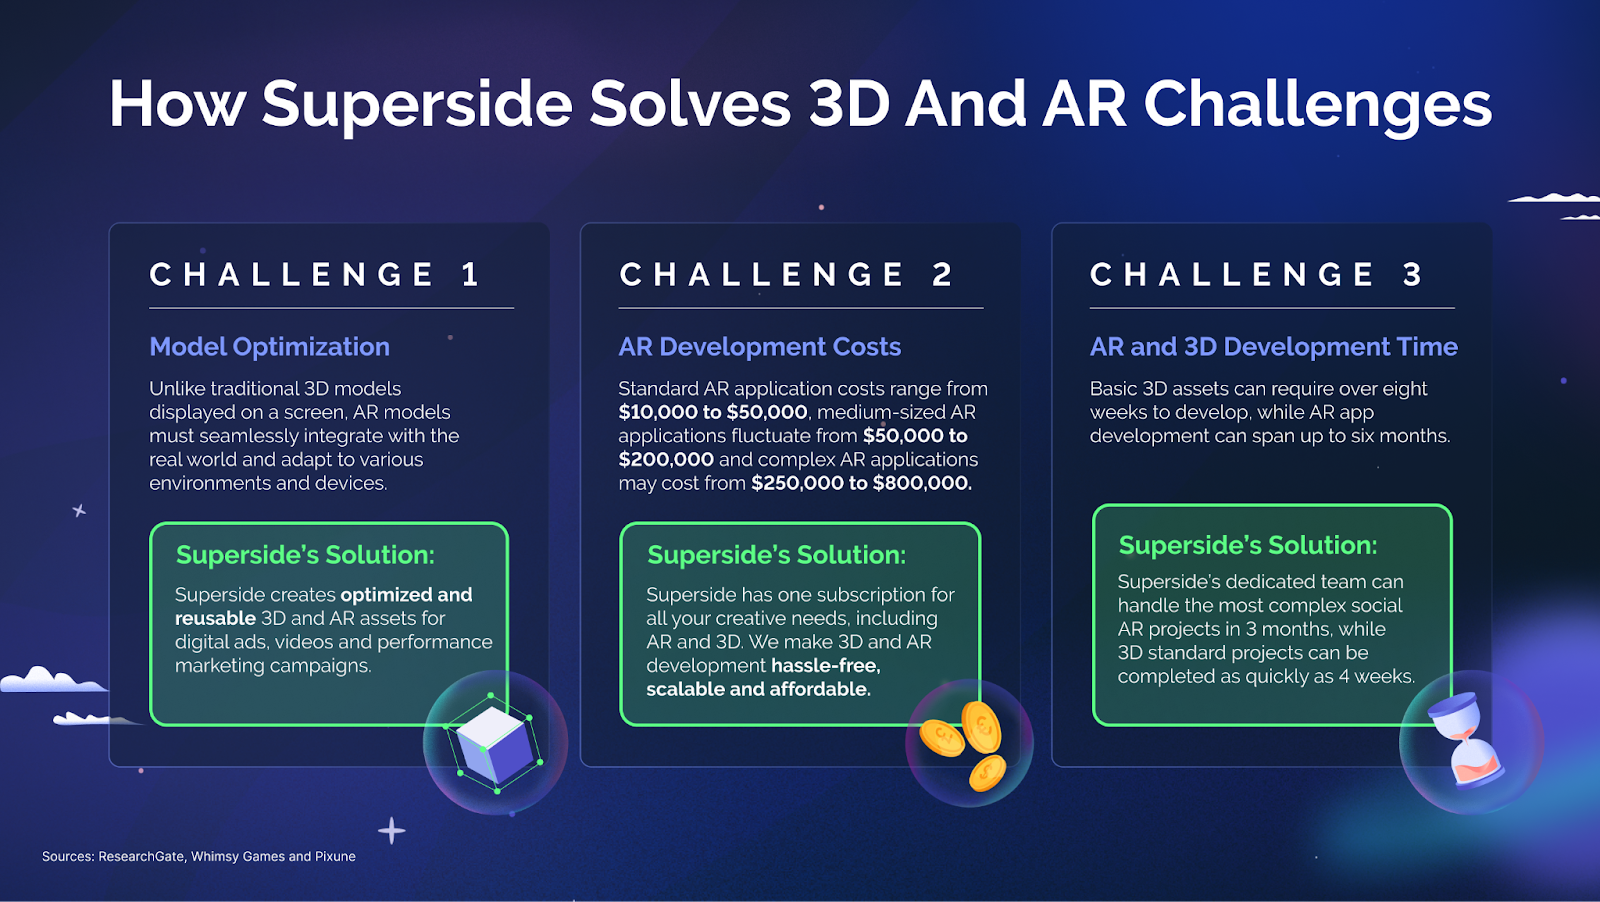 How to solve AR and 3D challenges